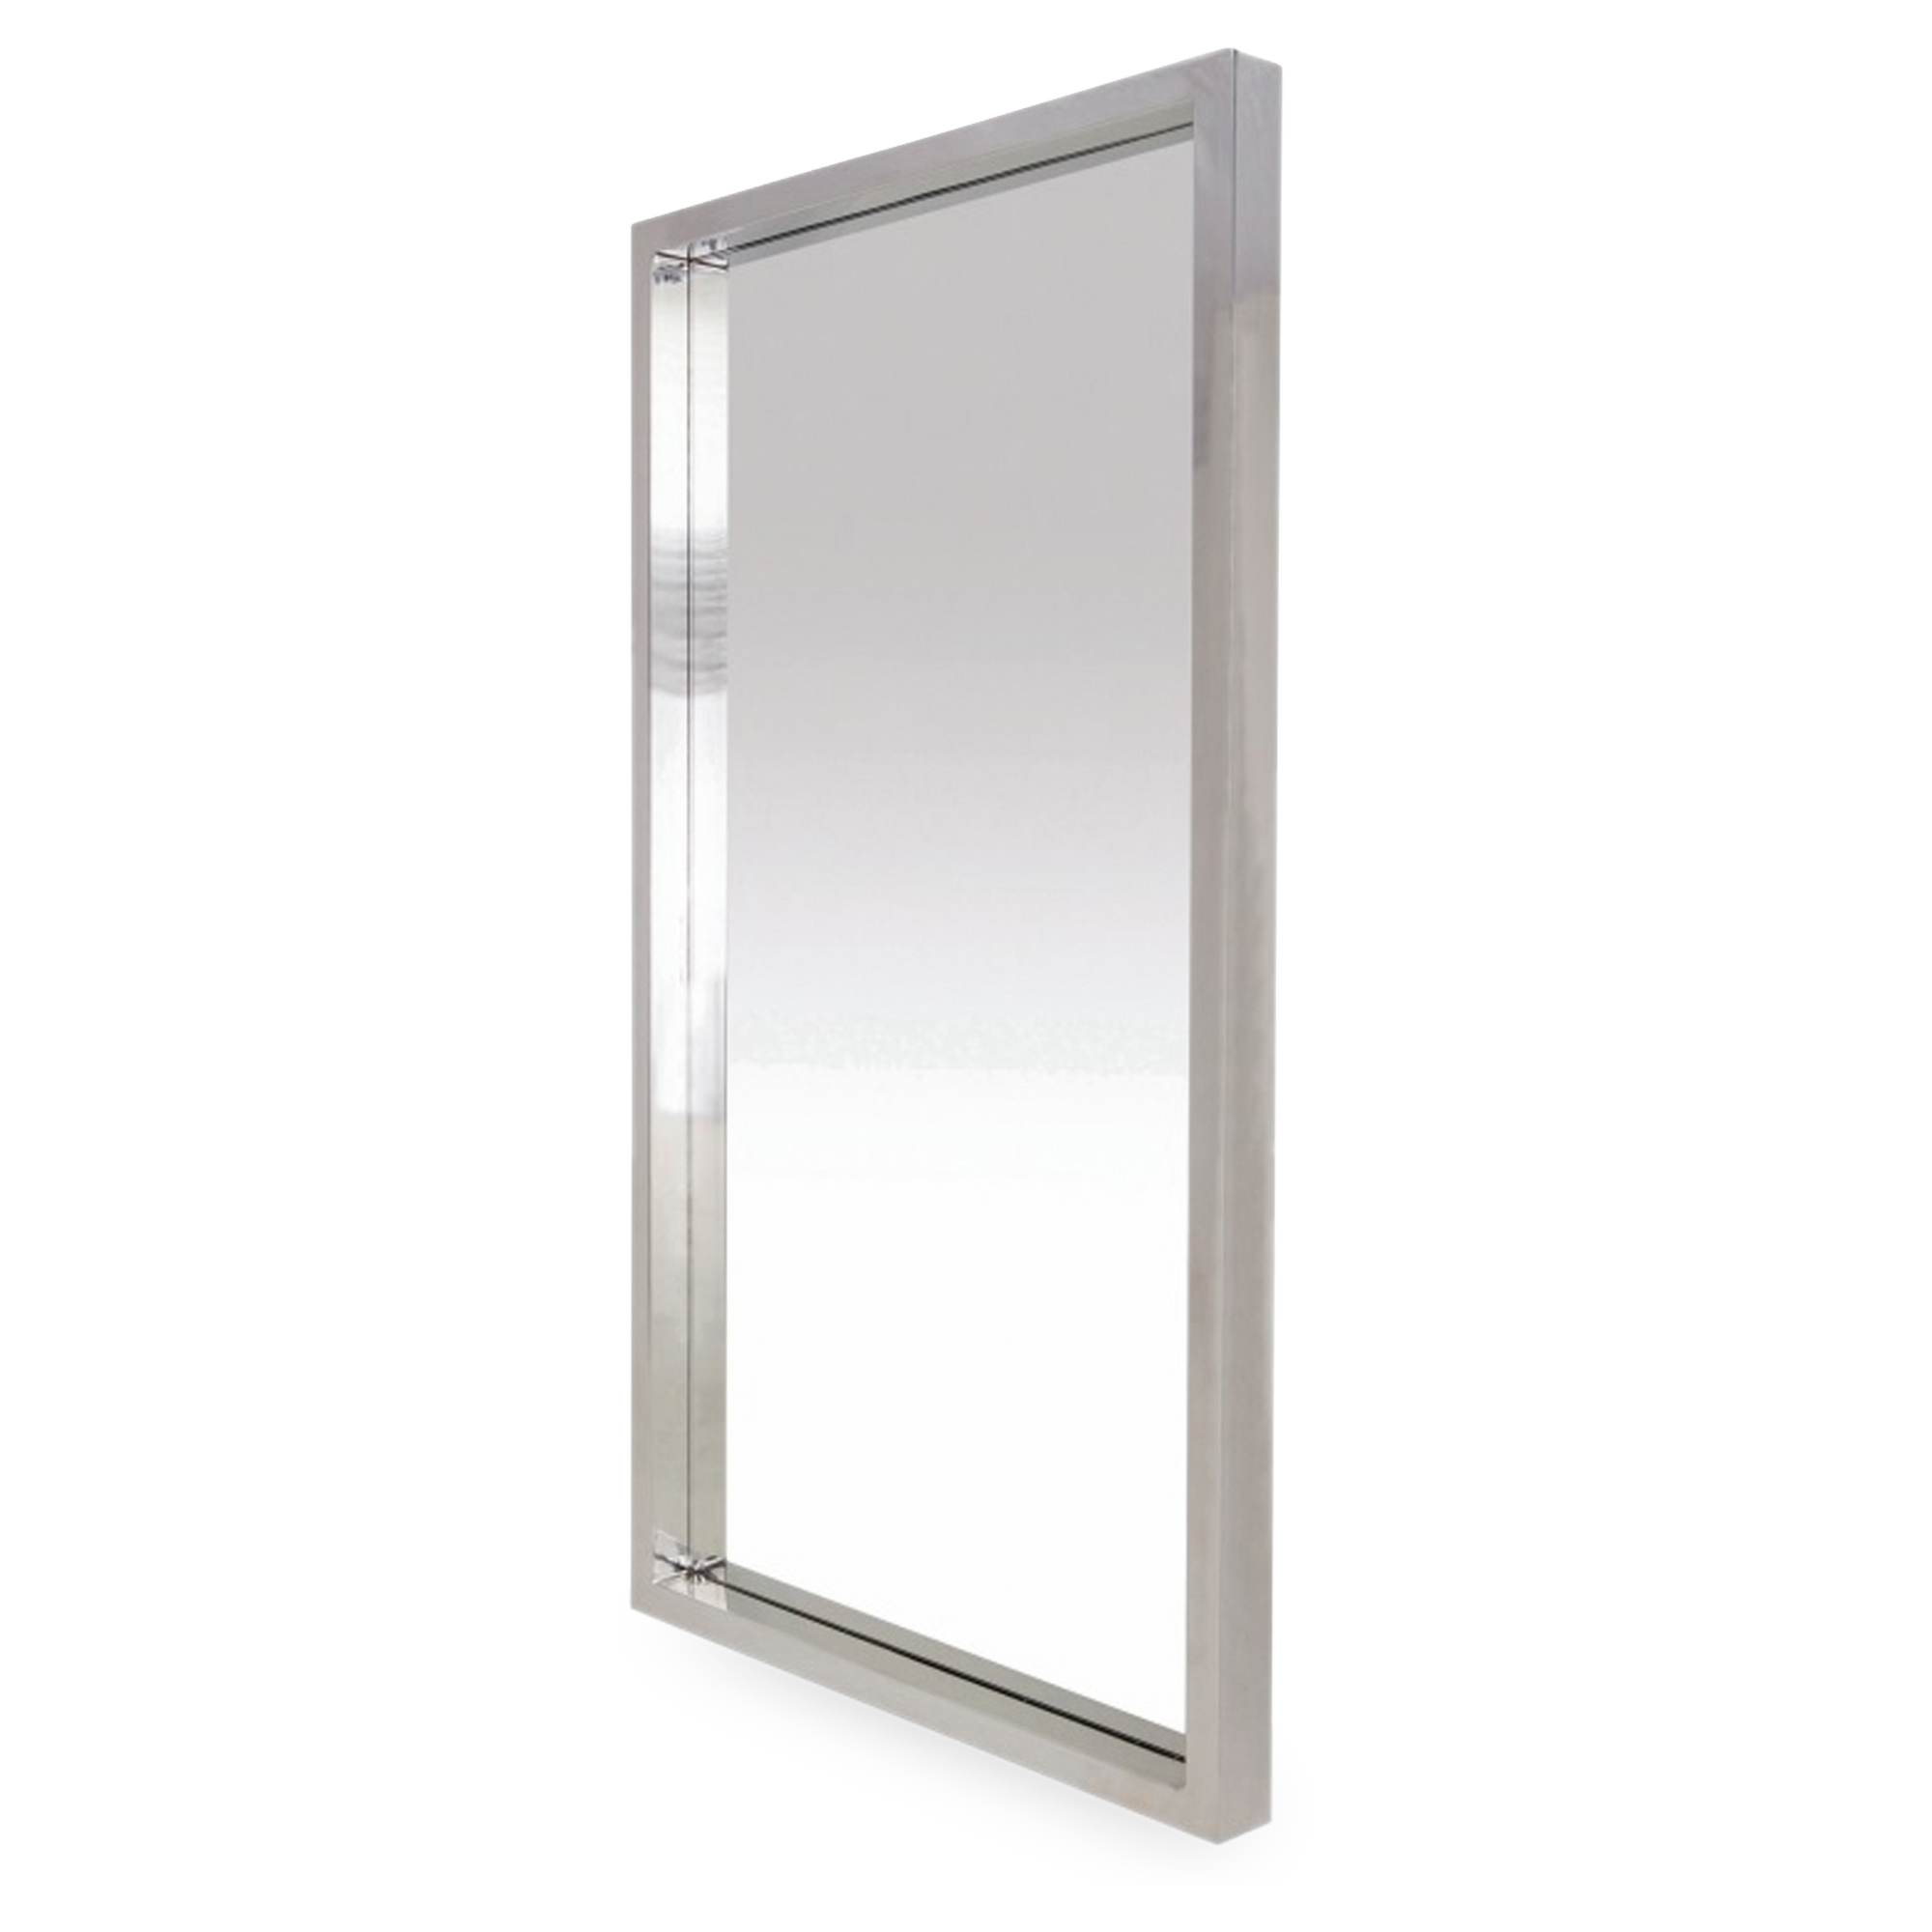 Simple, striking, bold, the Glam mirrors oversized appearance makes a grand, elegant statement.